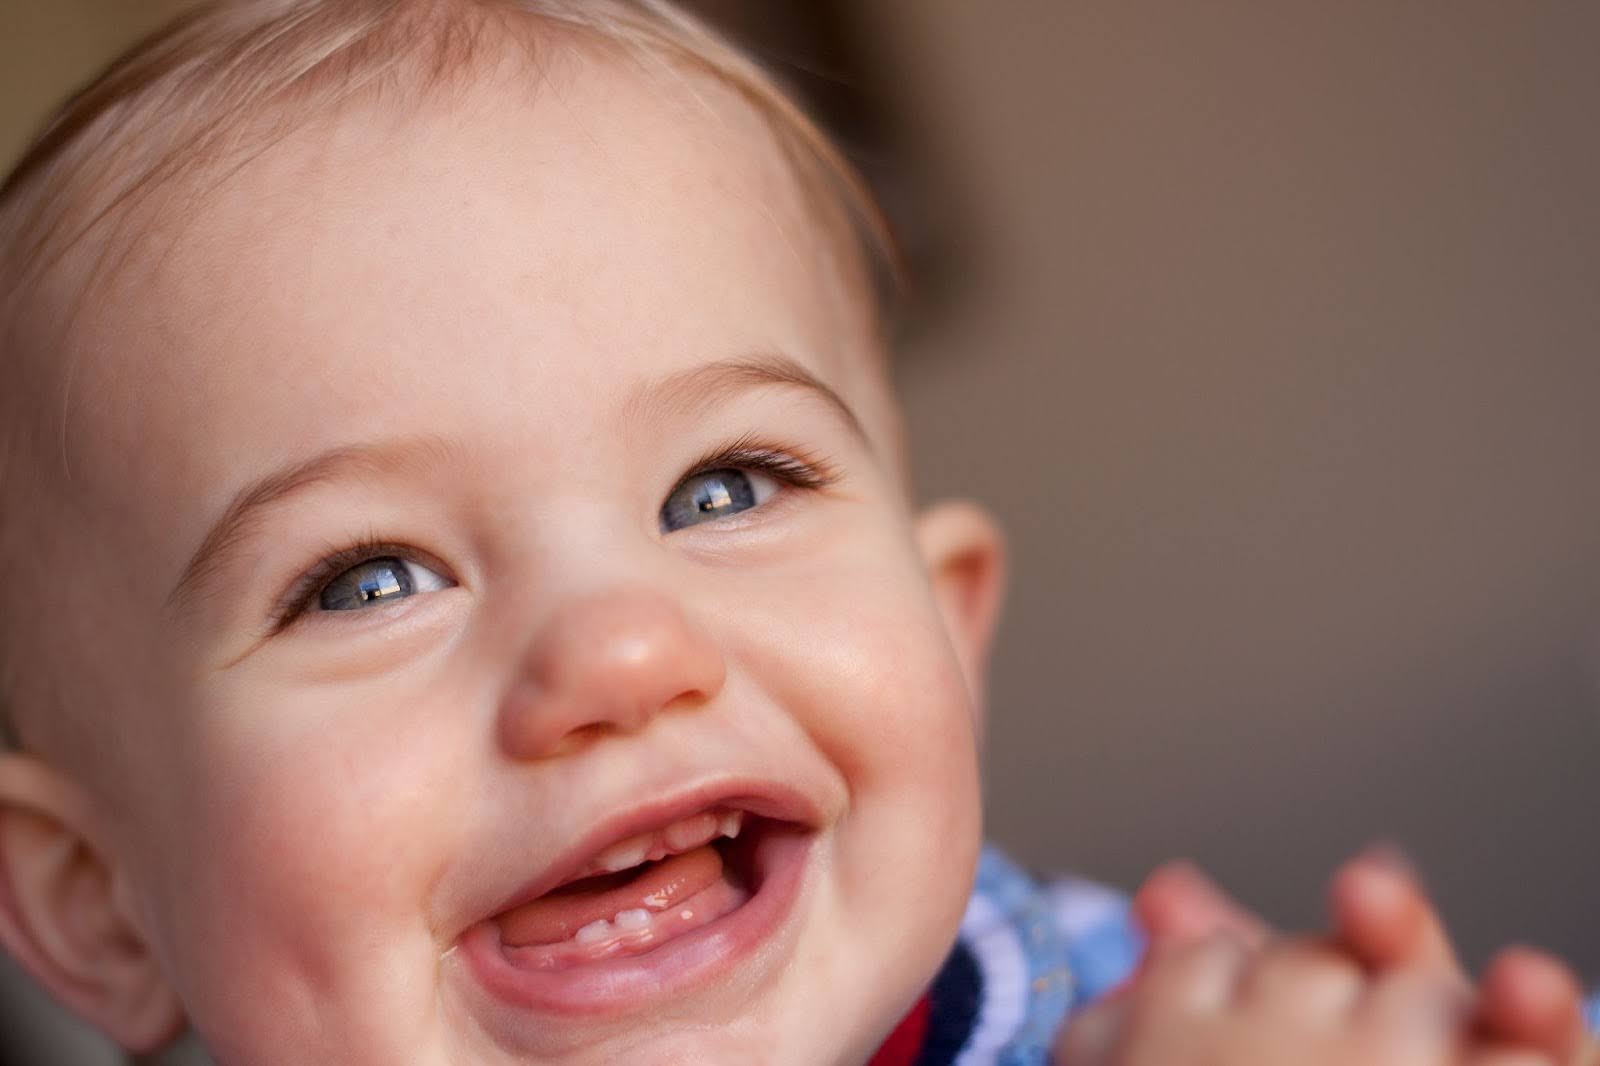 How To Tell If Your Infant Is Teething